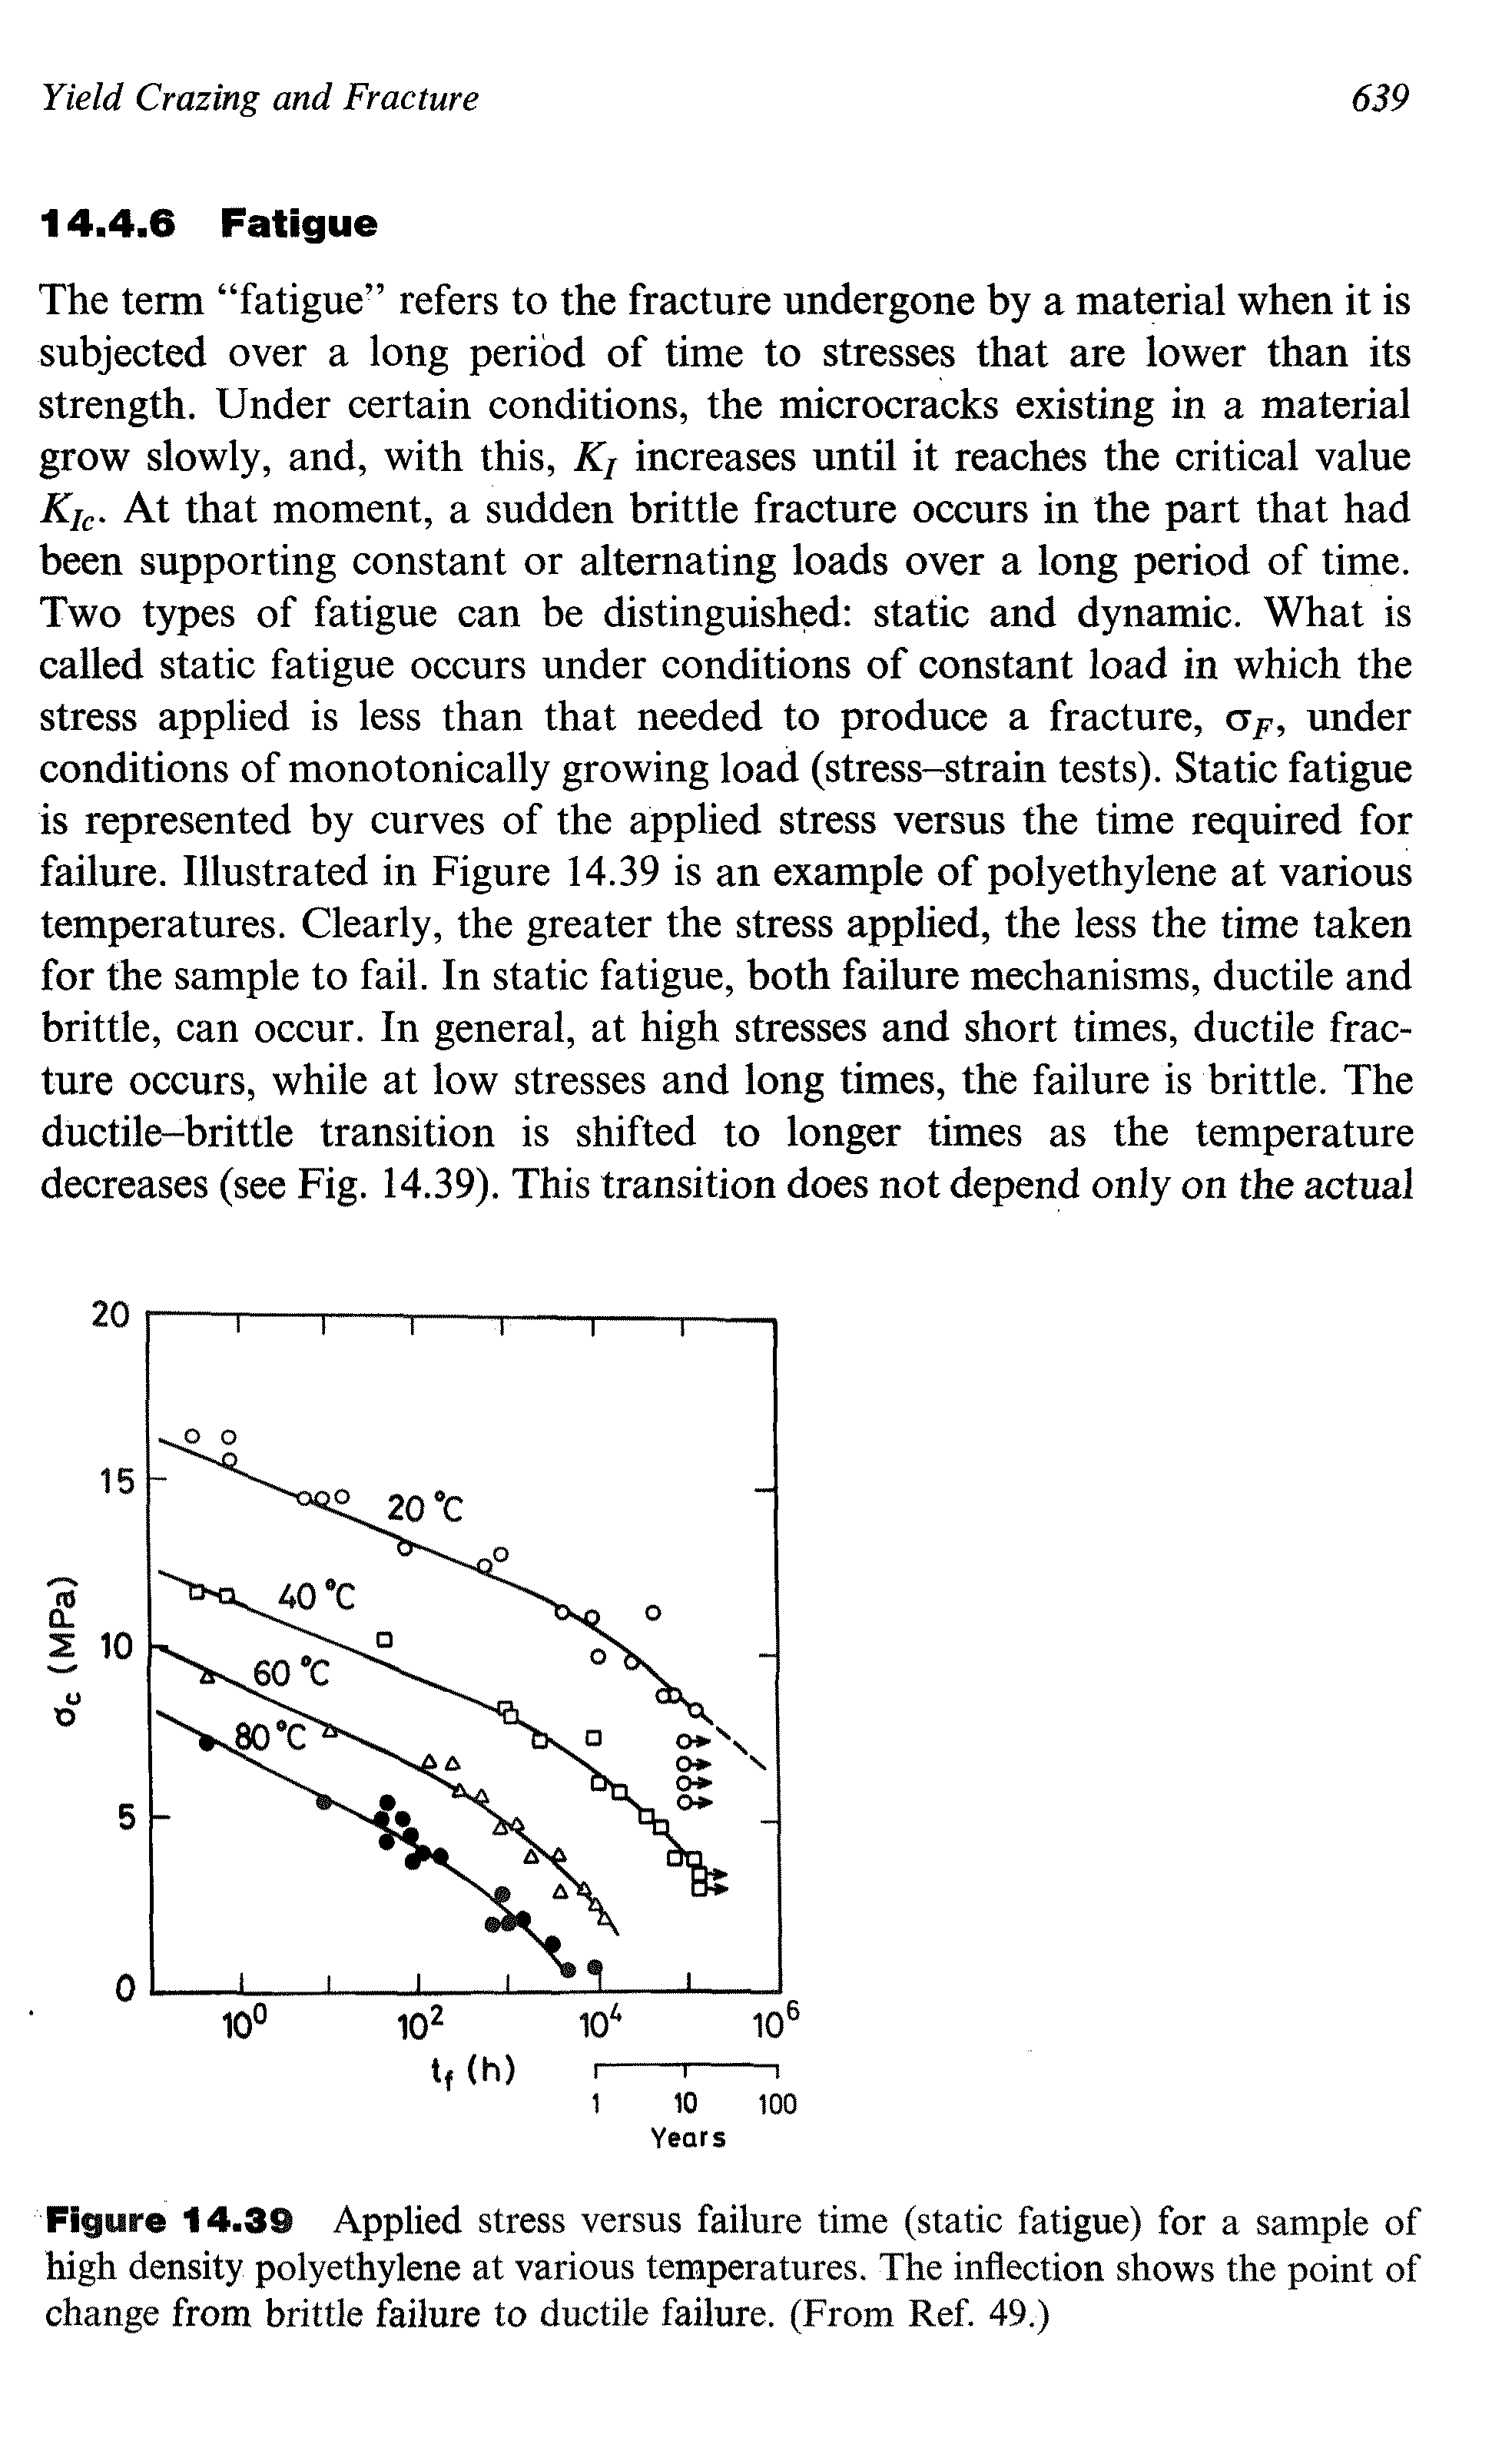 Figure 14.39 Applied stress versus failure time (static fatigue) for a sample of high density polyethylene at various temperatures. The inflection shows the point of change from brittle failure to ductile failure. (From Ref. 49.)...